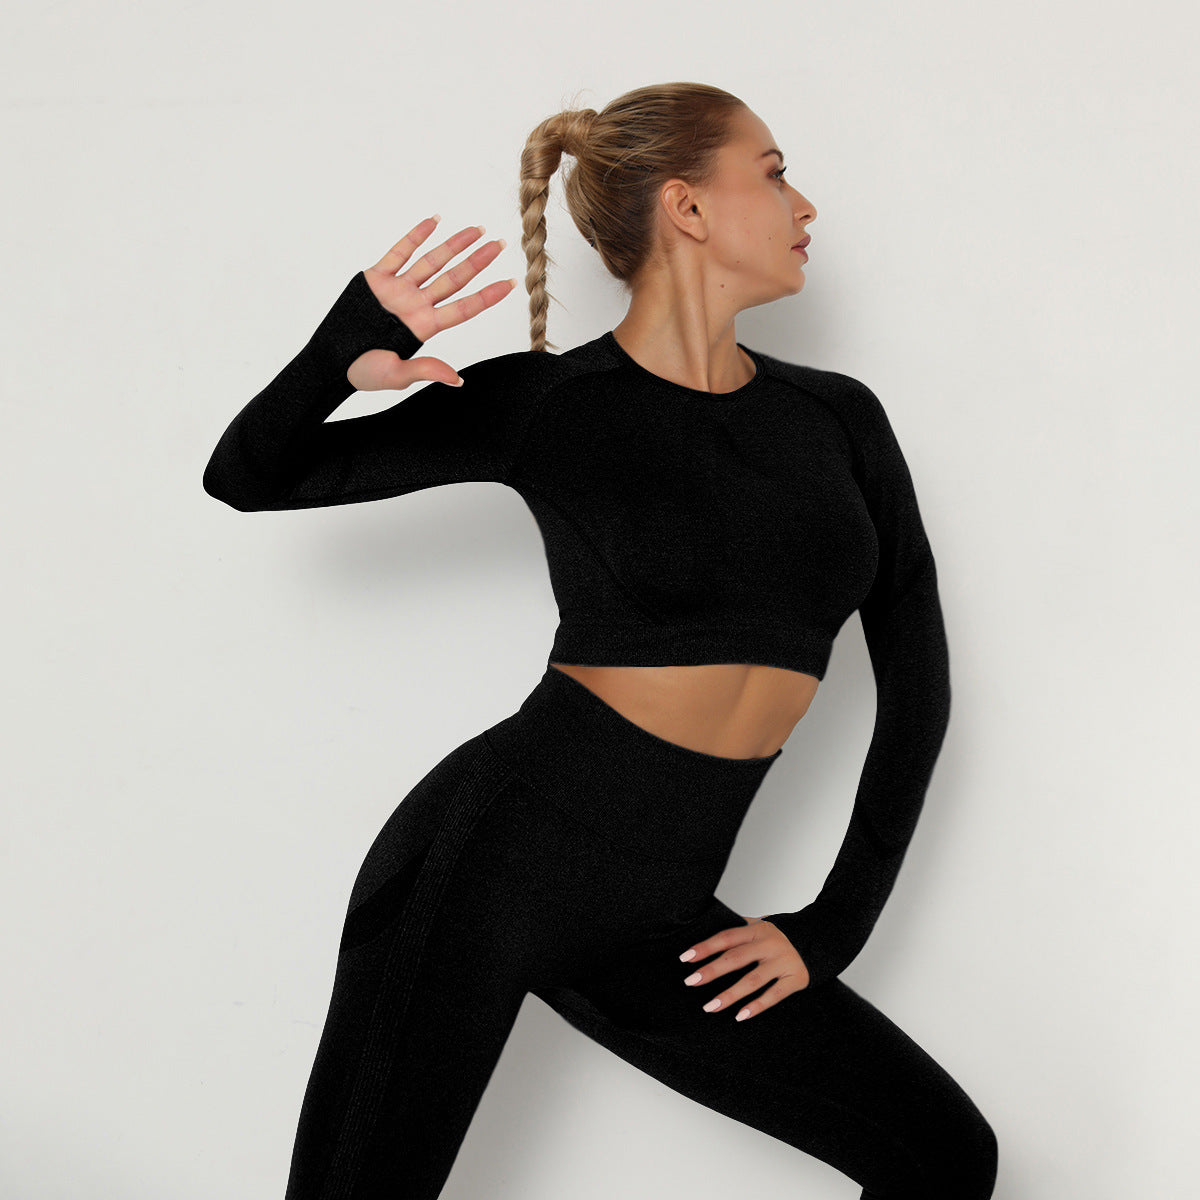 Seamless Yoga Wear With Long Sleeves, High Stretch Folds And Quick-drying Long-sleeved Fitness Yoga Wear Top - ladieskits